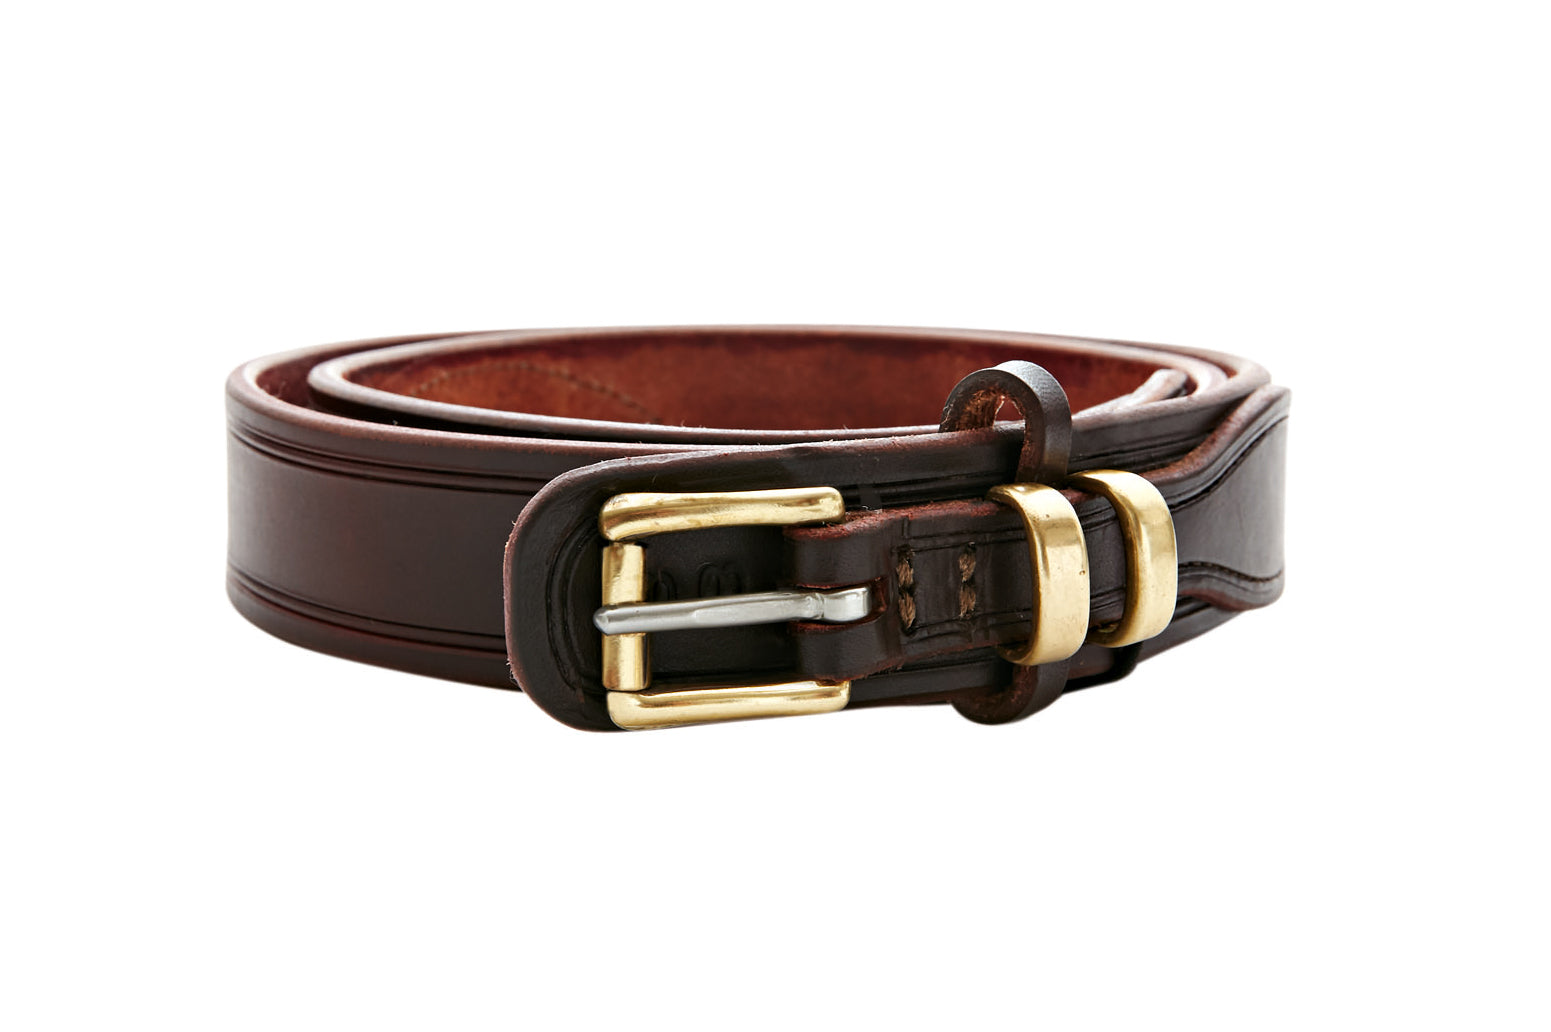 Drovers Leather Belt with Brass Buckle | Angus Barrett Saddlery